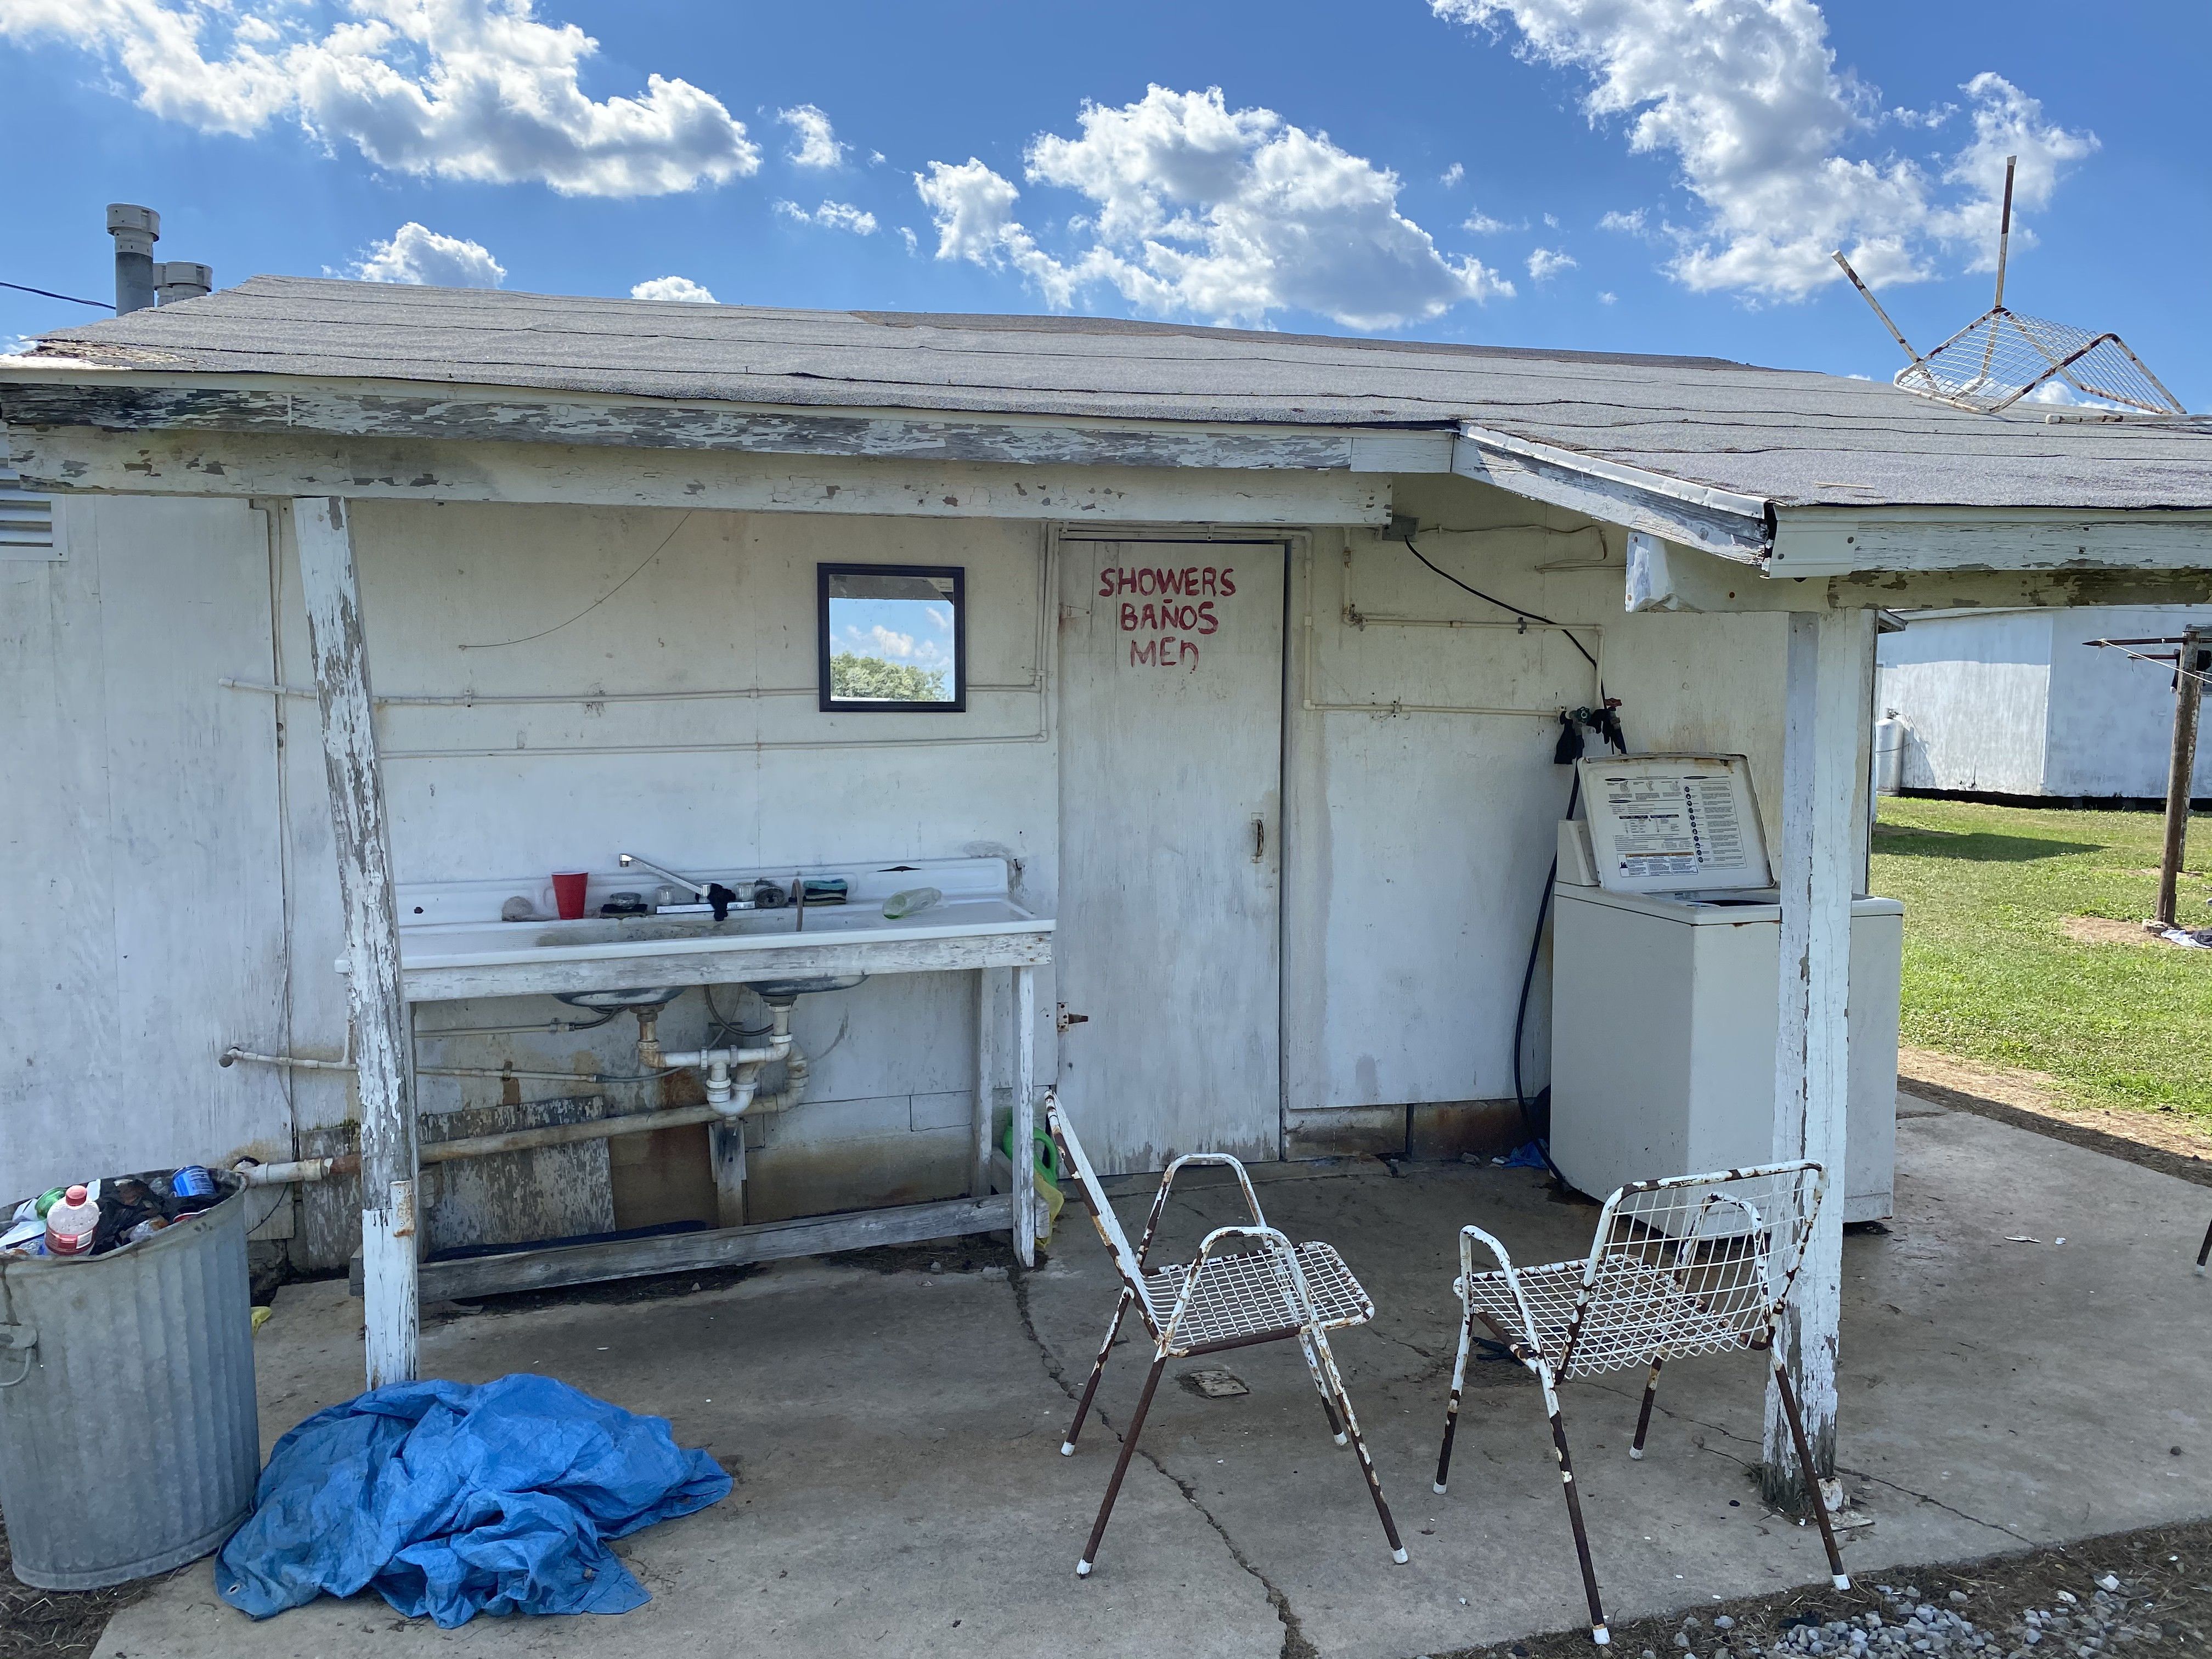 An image of the bathrooms farmworkers share in a migrant camp in Delta, Ohio. Image by Areeba Shah. United States, 2020.